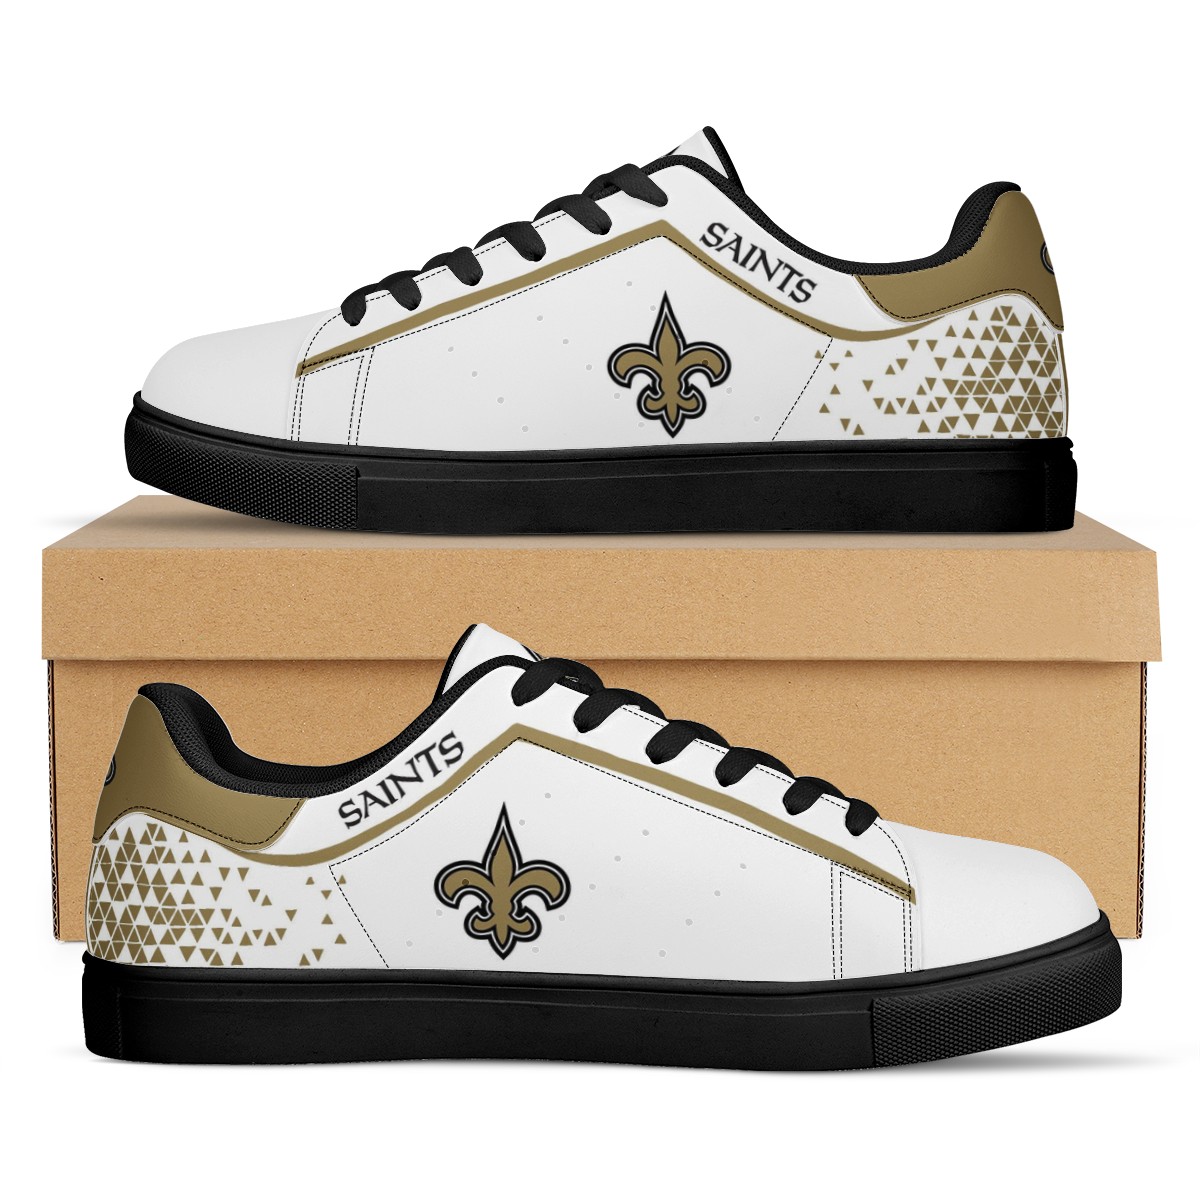 Women's New Orleans Saints Low Top Leather Sneakers 001